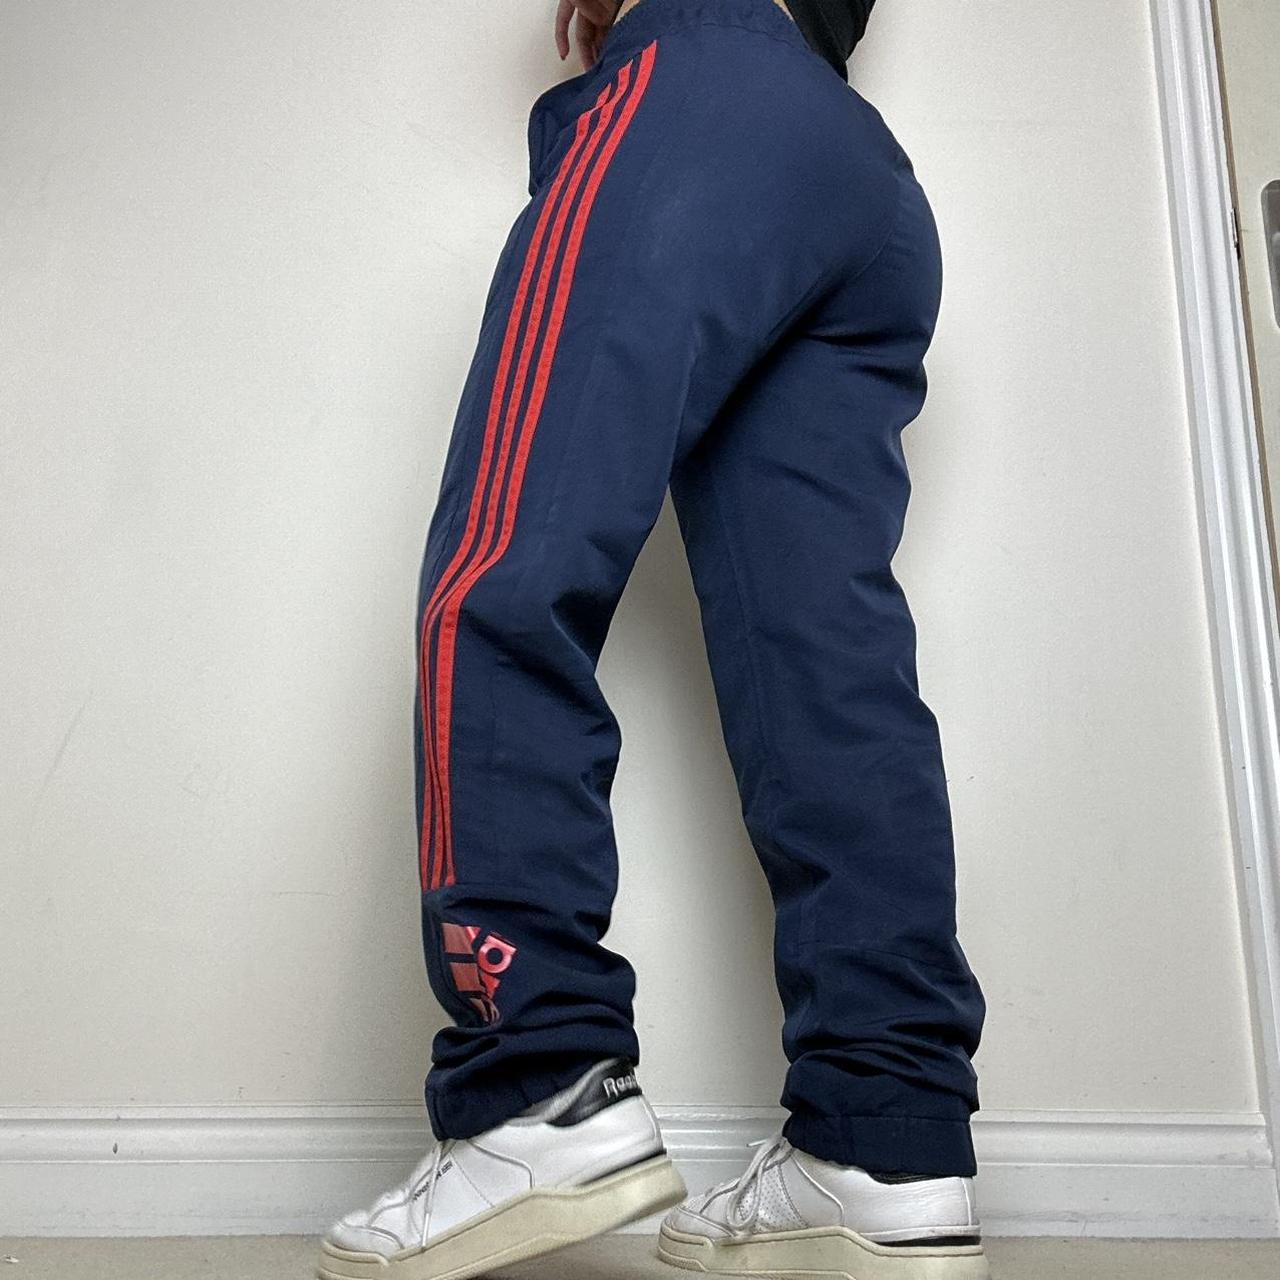 Adidas navy blue and red joggers / tracksuit... - Depop